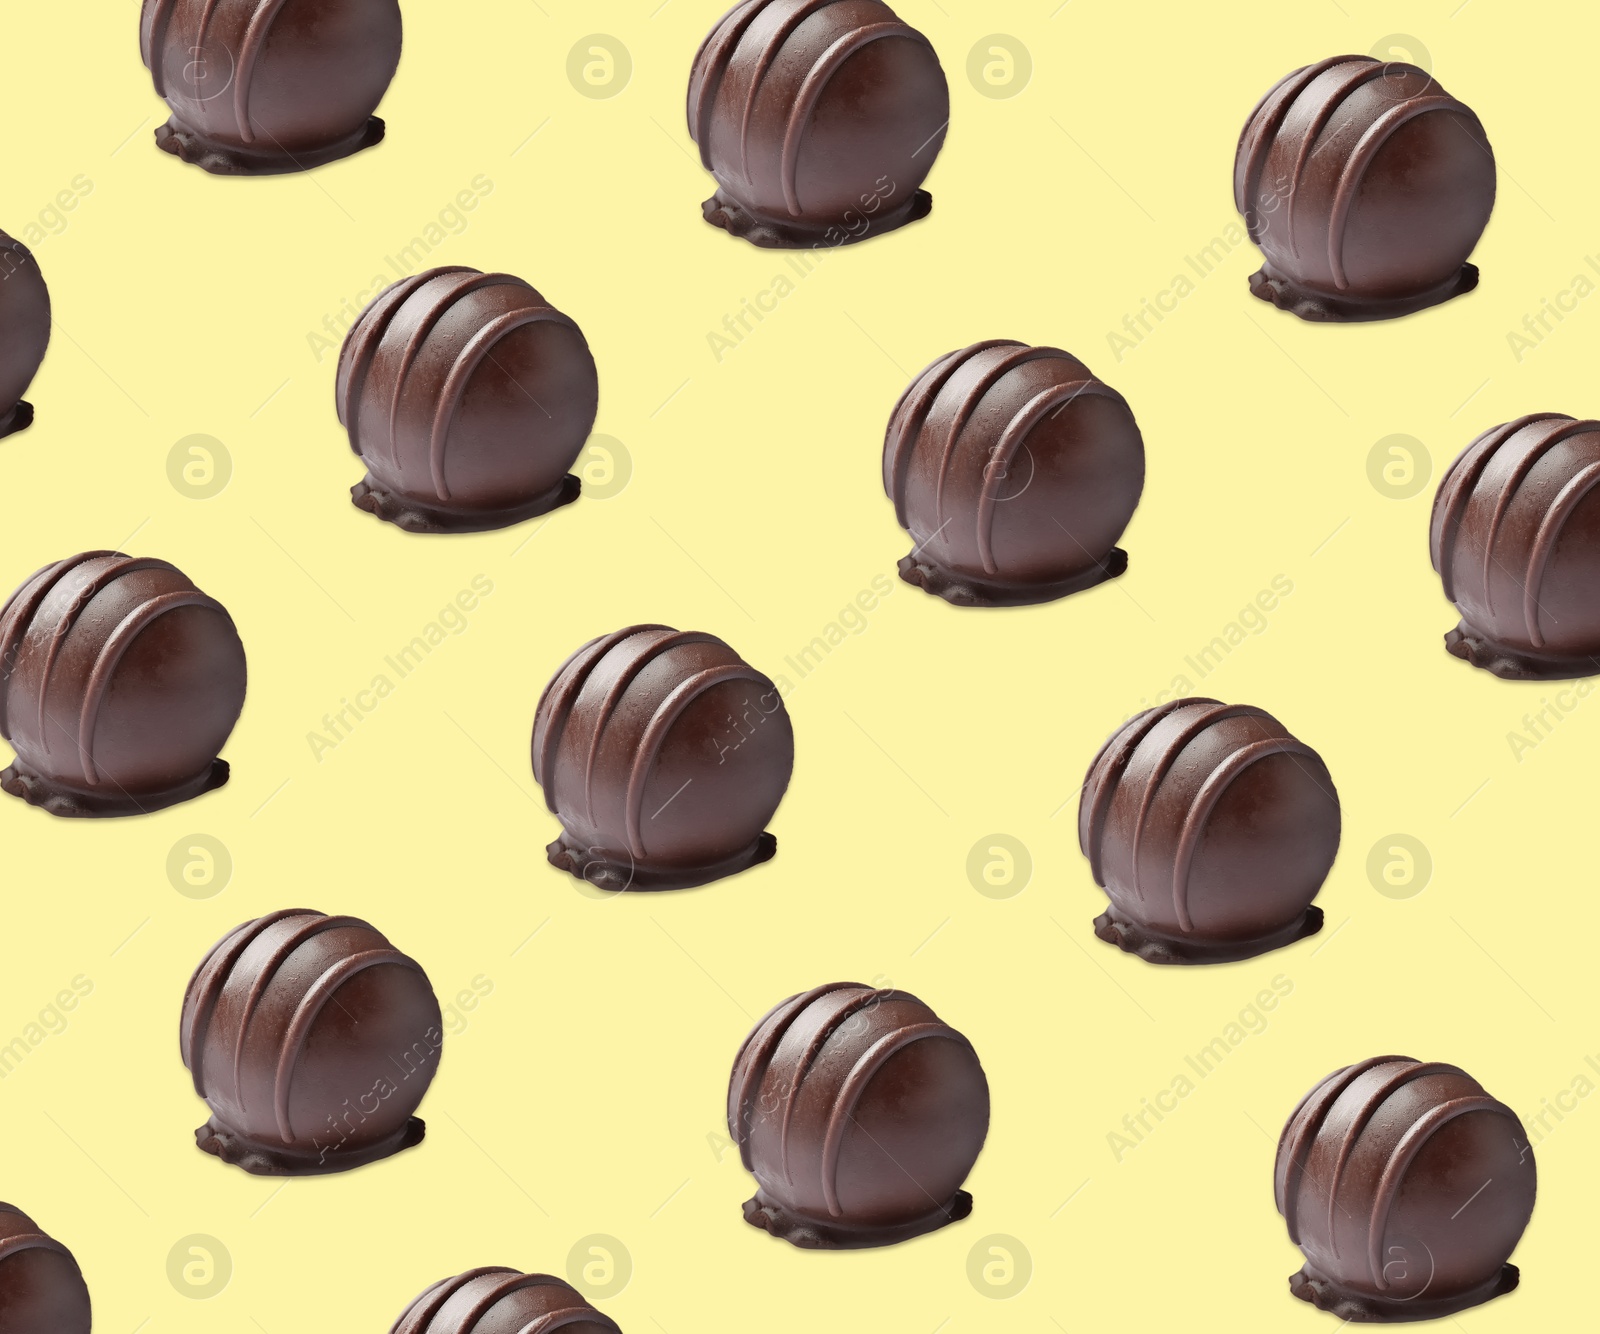 Image of Tasty chocolate candies on pale yellow background. Pattern design